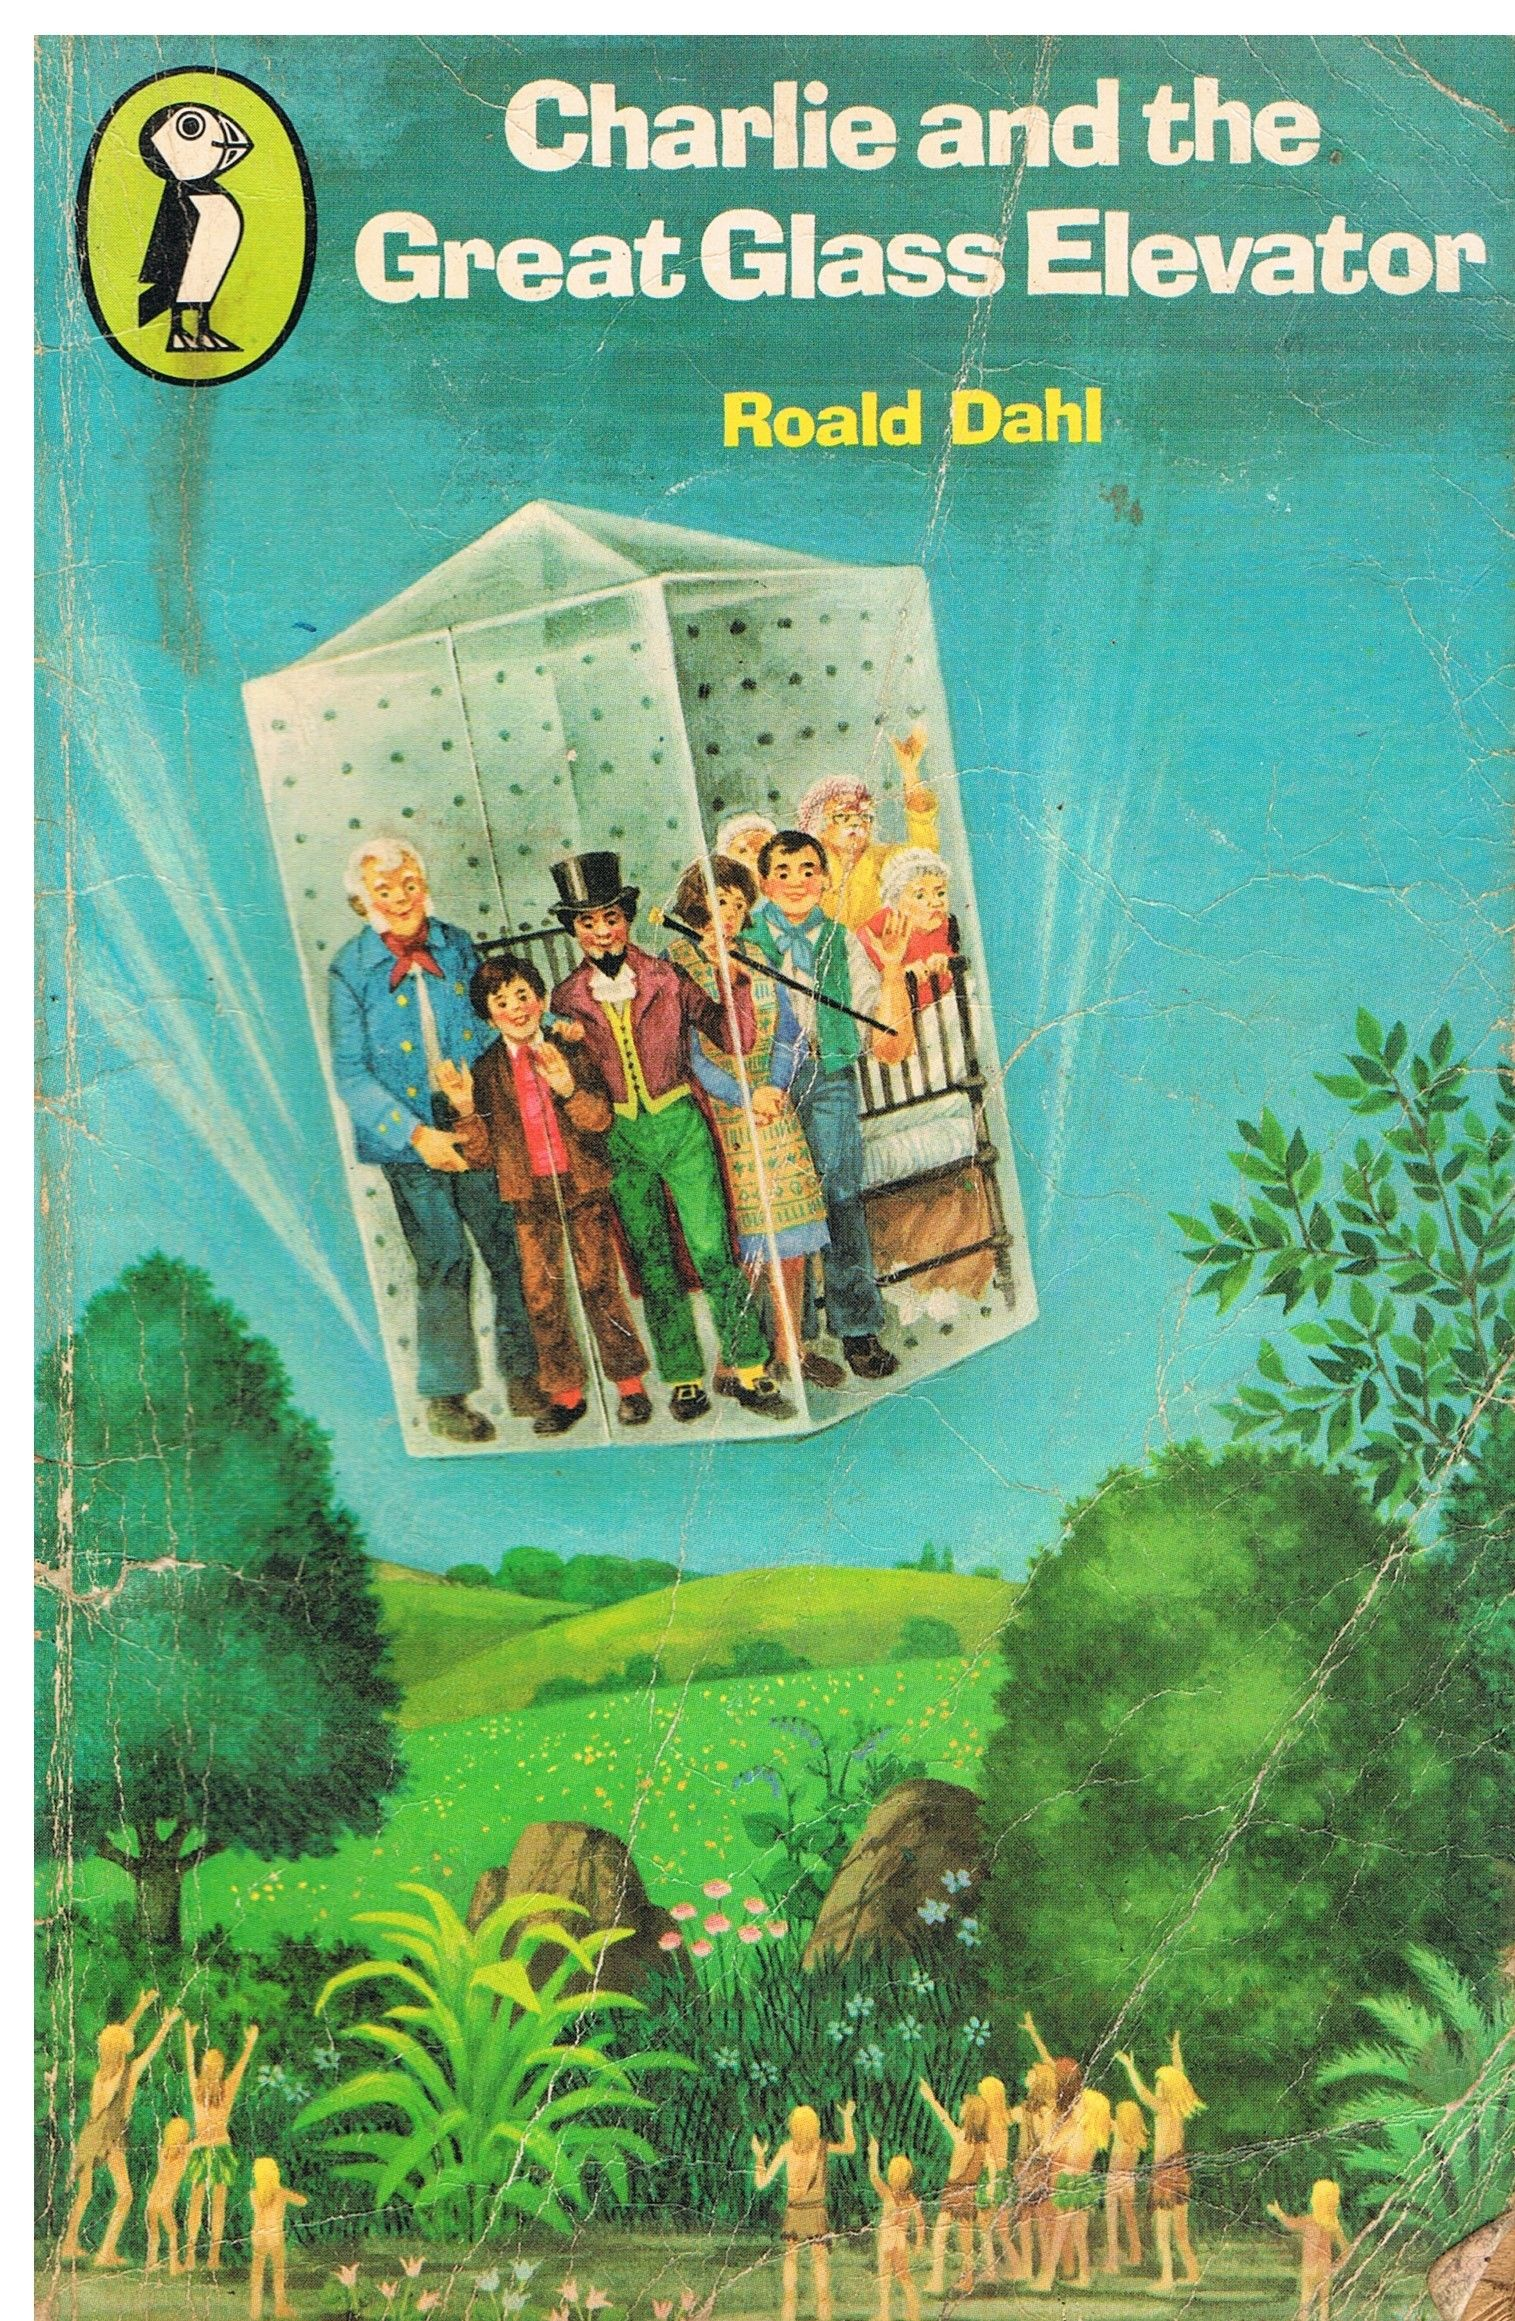 The book cover of Charlie and the Great Glass Elevator